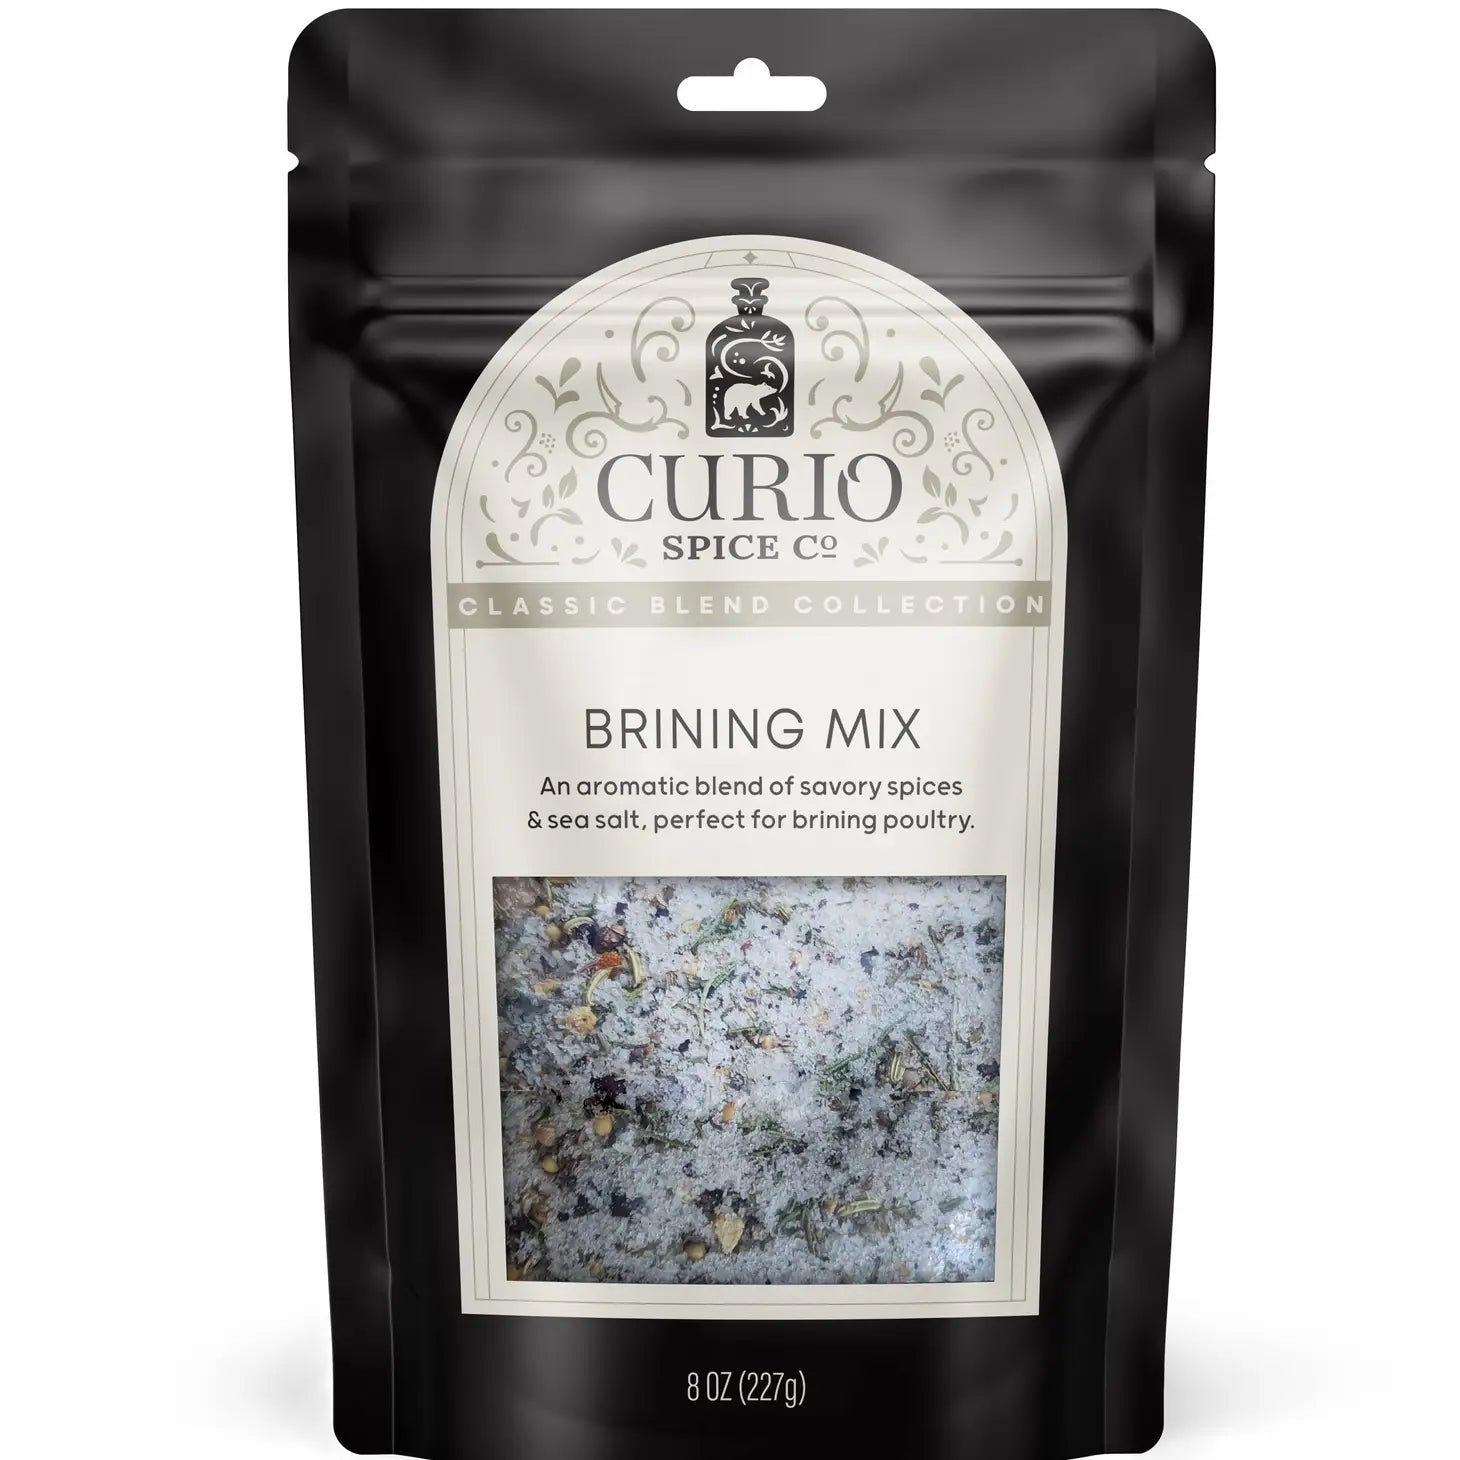 Curio Spice Co Brining Mix in a sealed pouch. 